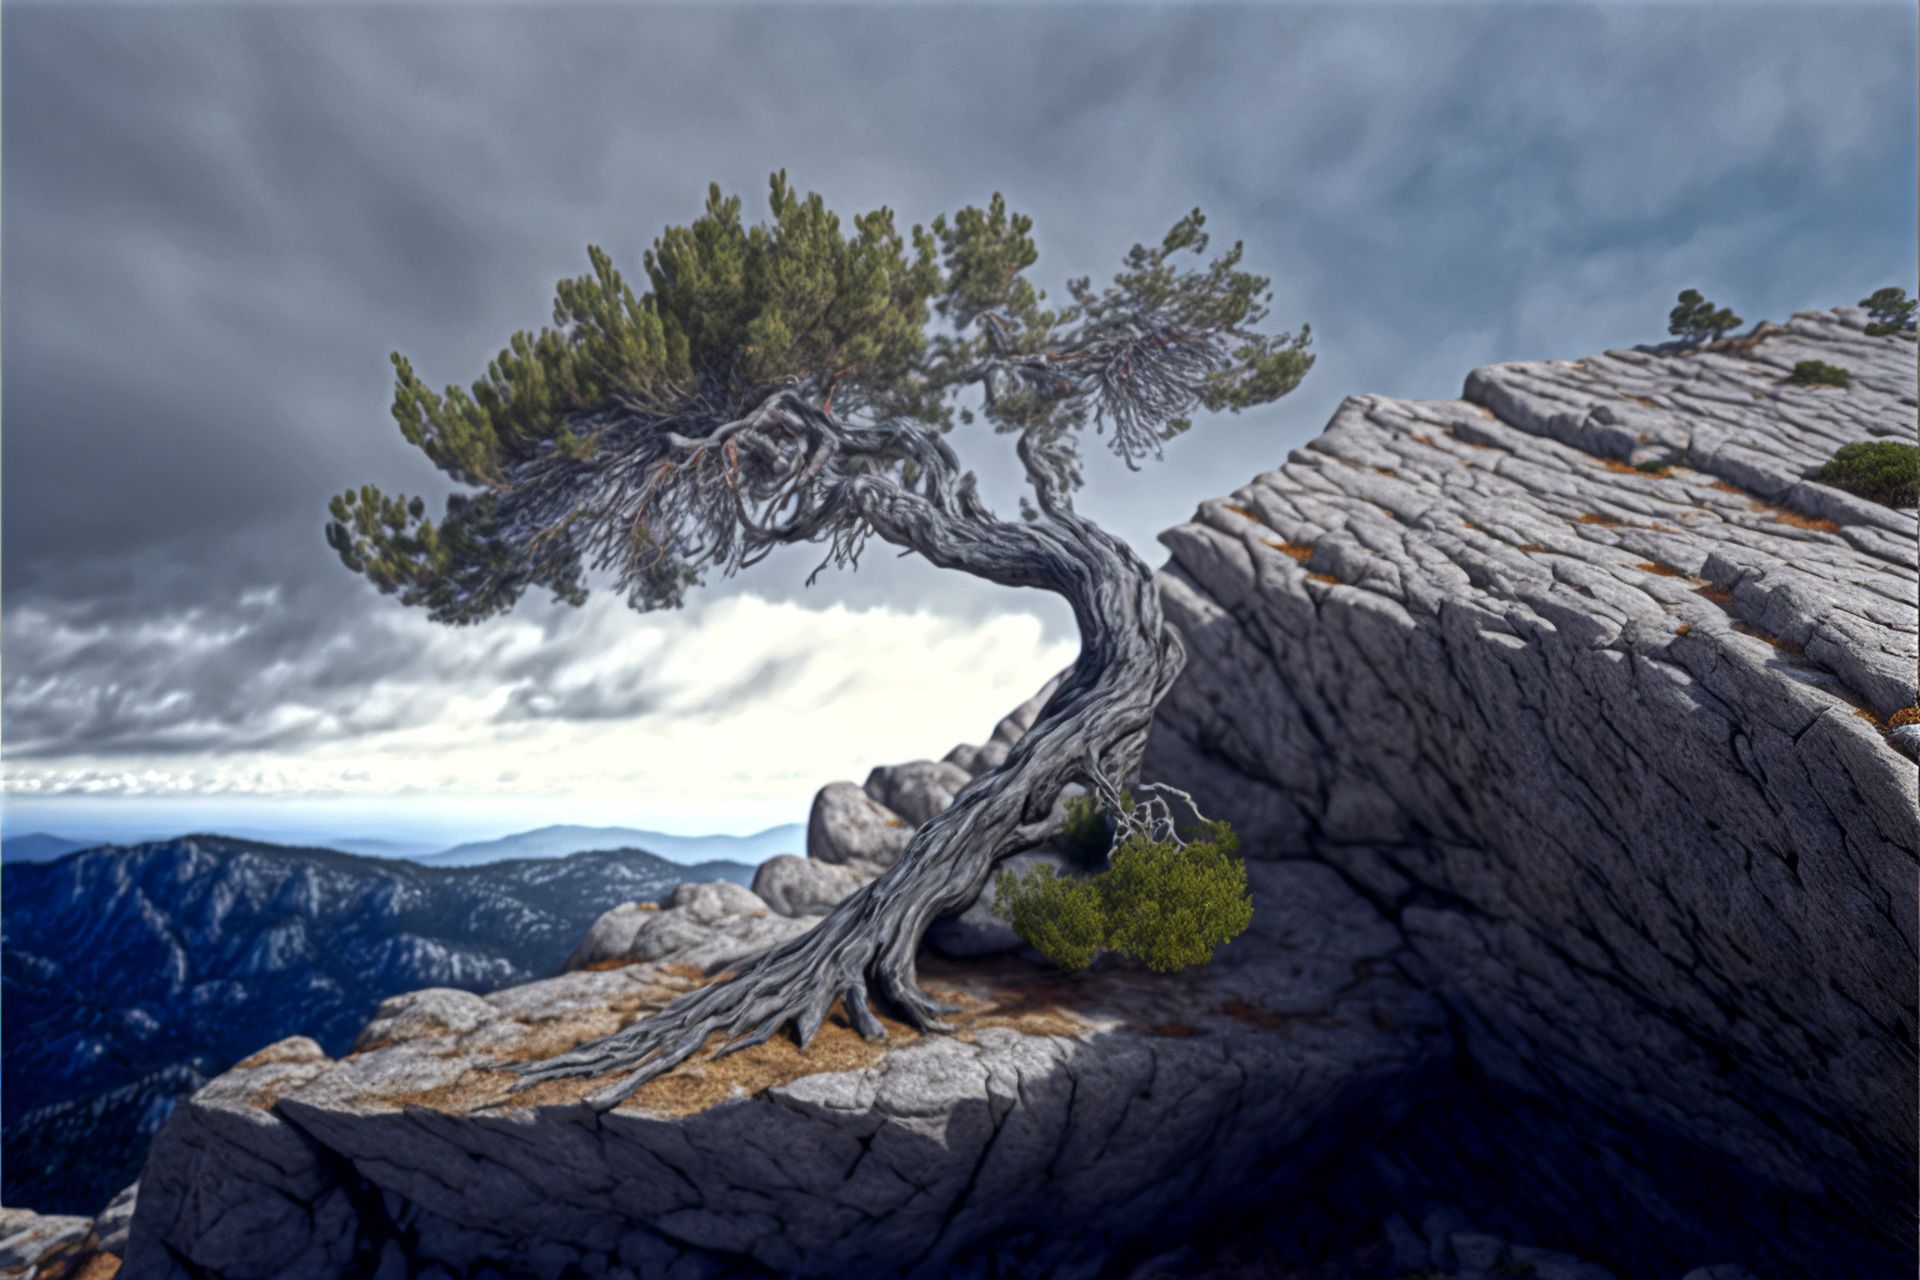 An old Juniper tree growing on a mountain